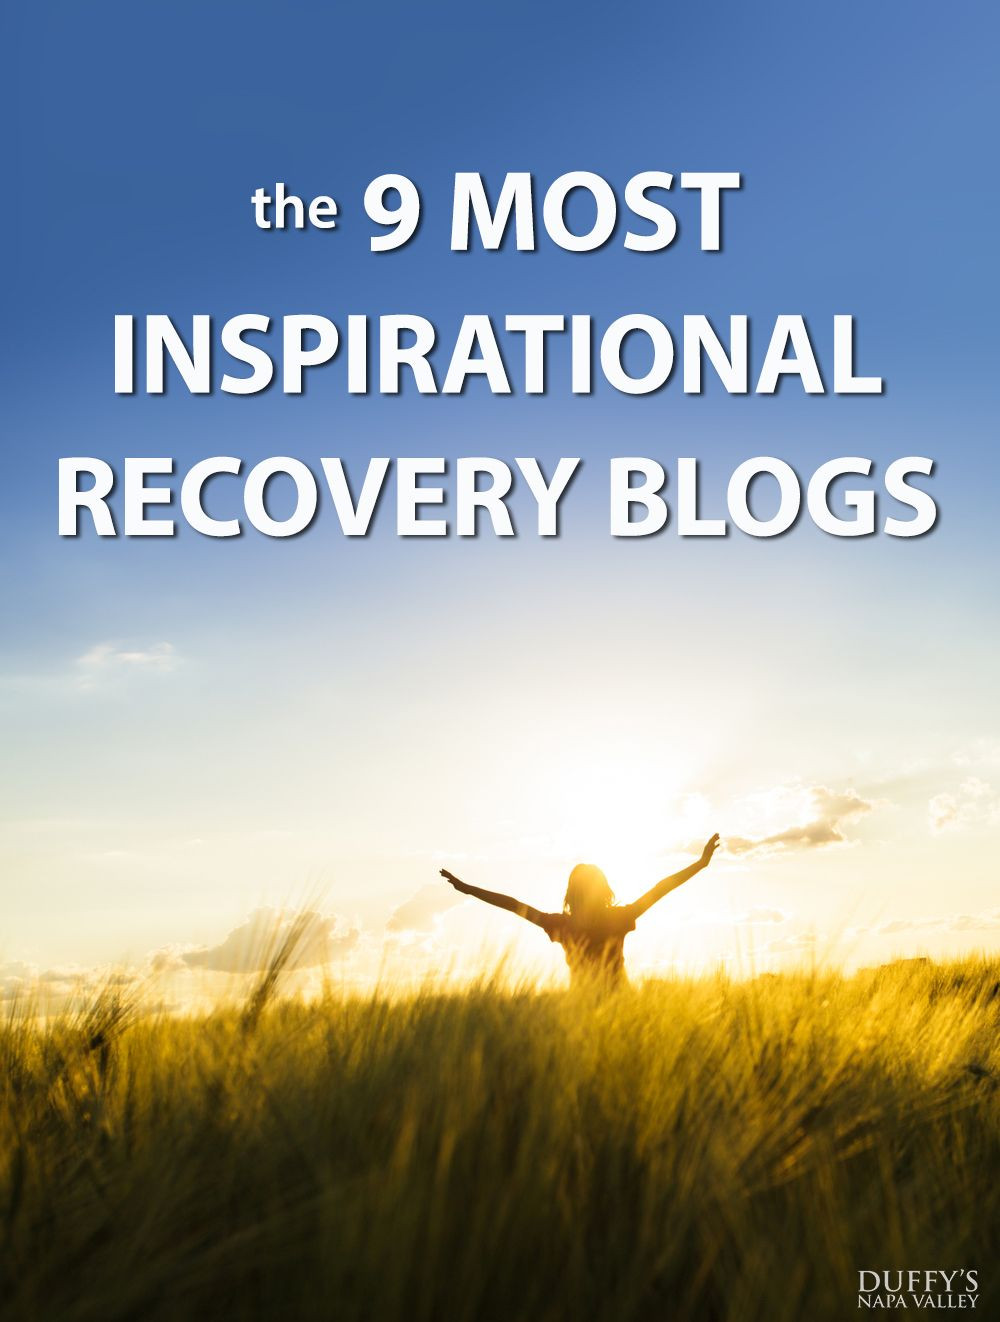 Inspirational Recovery Quotes
 top 9 most inspirational recovery blogs